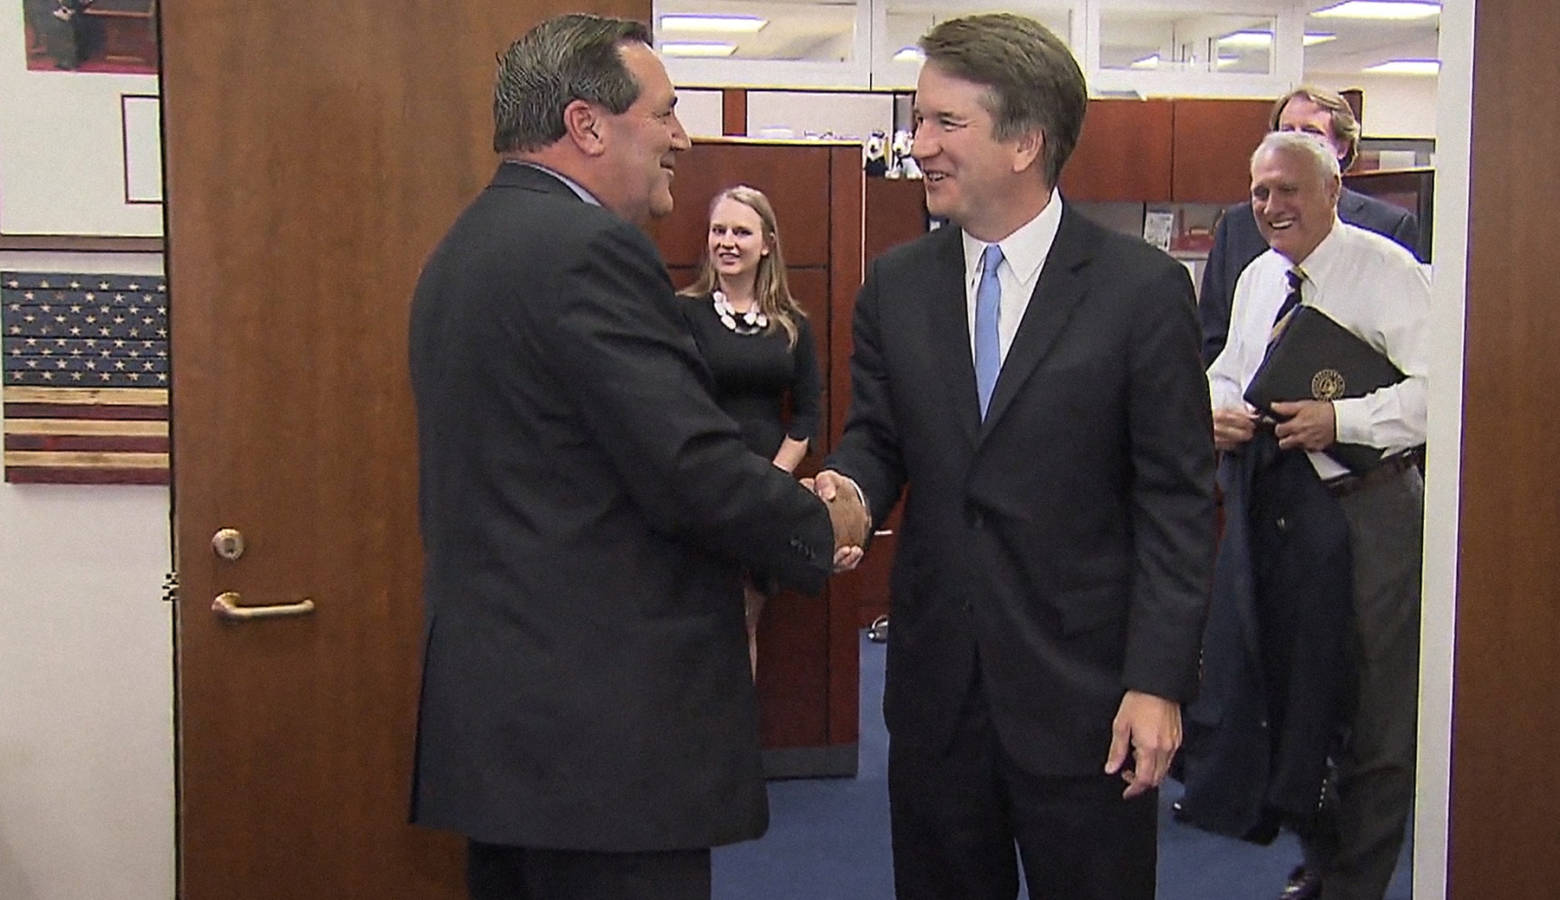 Sen. Joe Donnelly (D-Ind.) says he’ll continue to review Kavanaugh’s record and watch his confirmation hearing before he decides whether to back him. (Photo courtesy of Sen. Joe Donnelly's office)